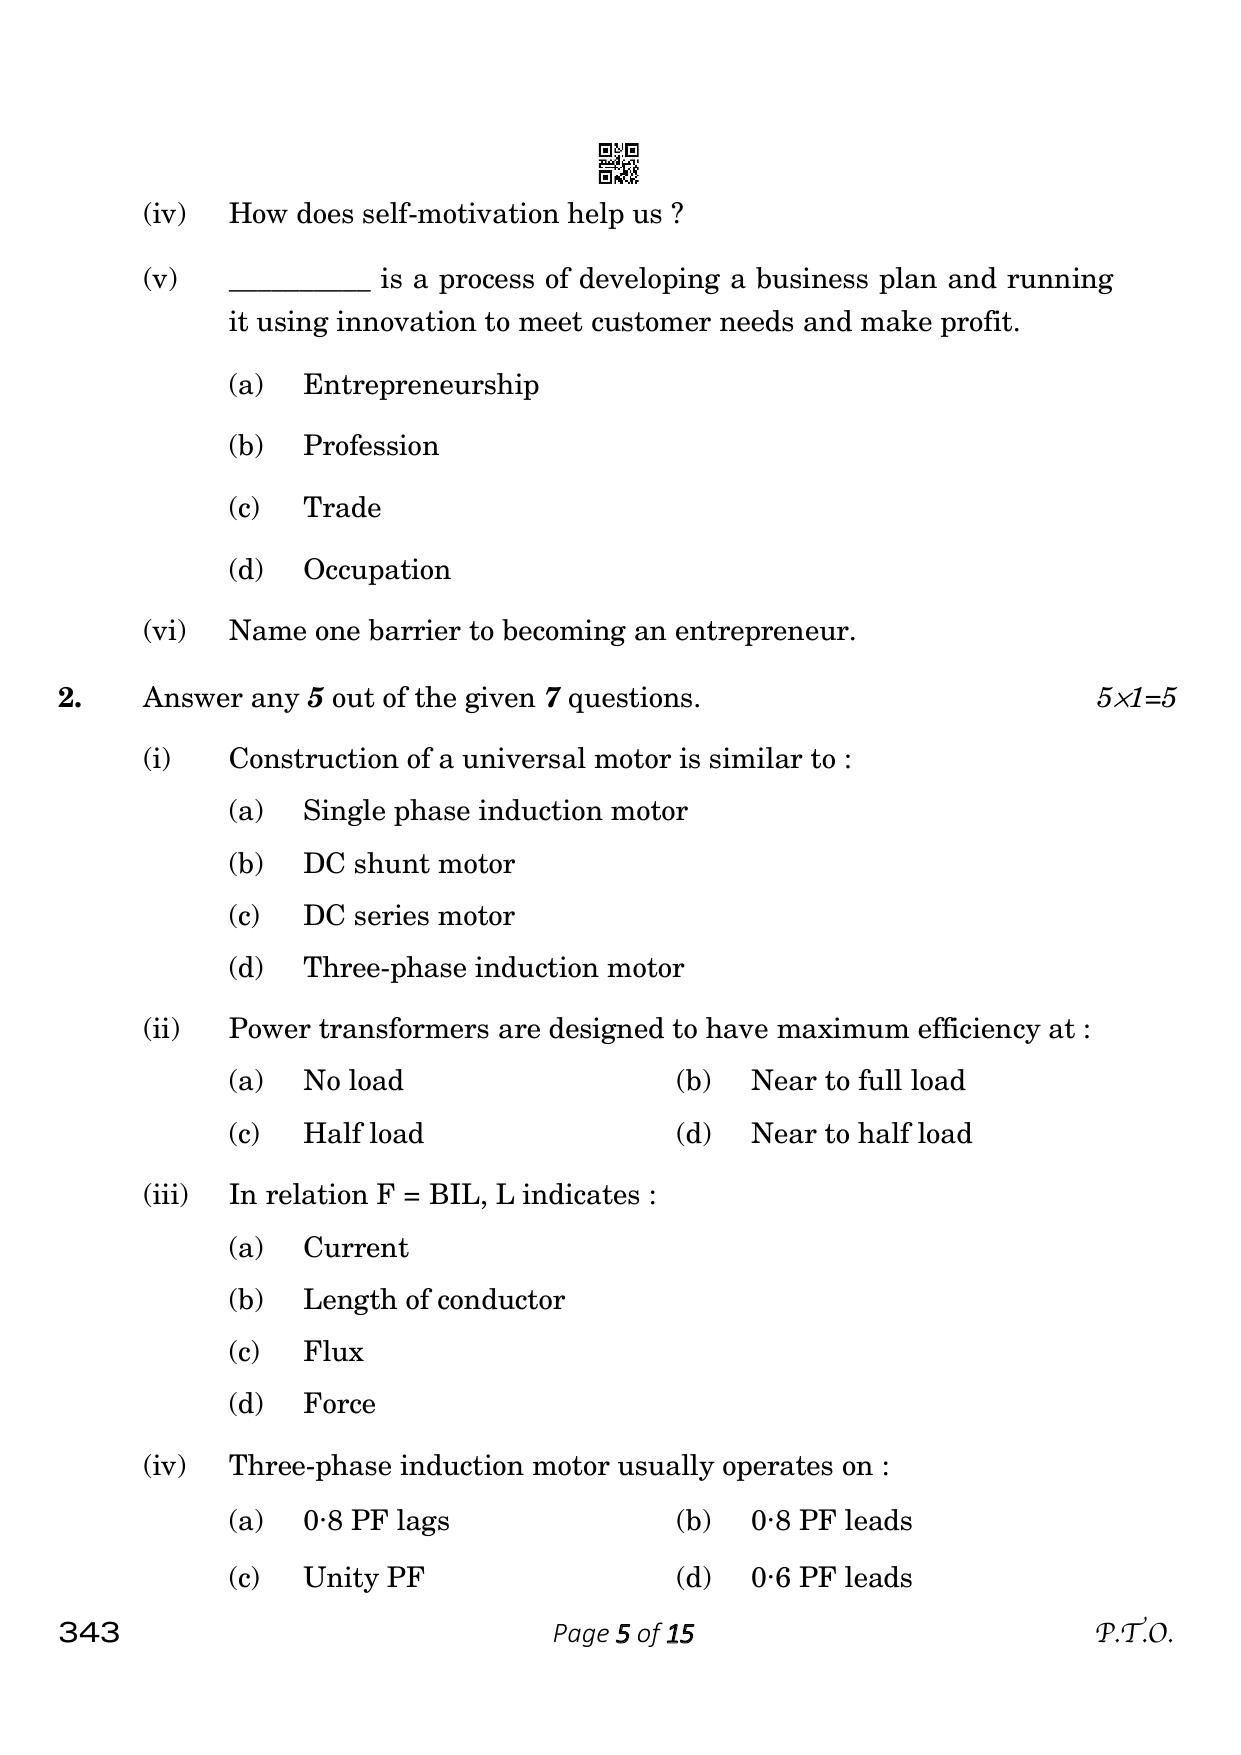 CBSE Class 12 343_Electrical Technology 2023 Question Paper - Page 5